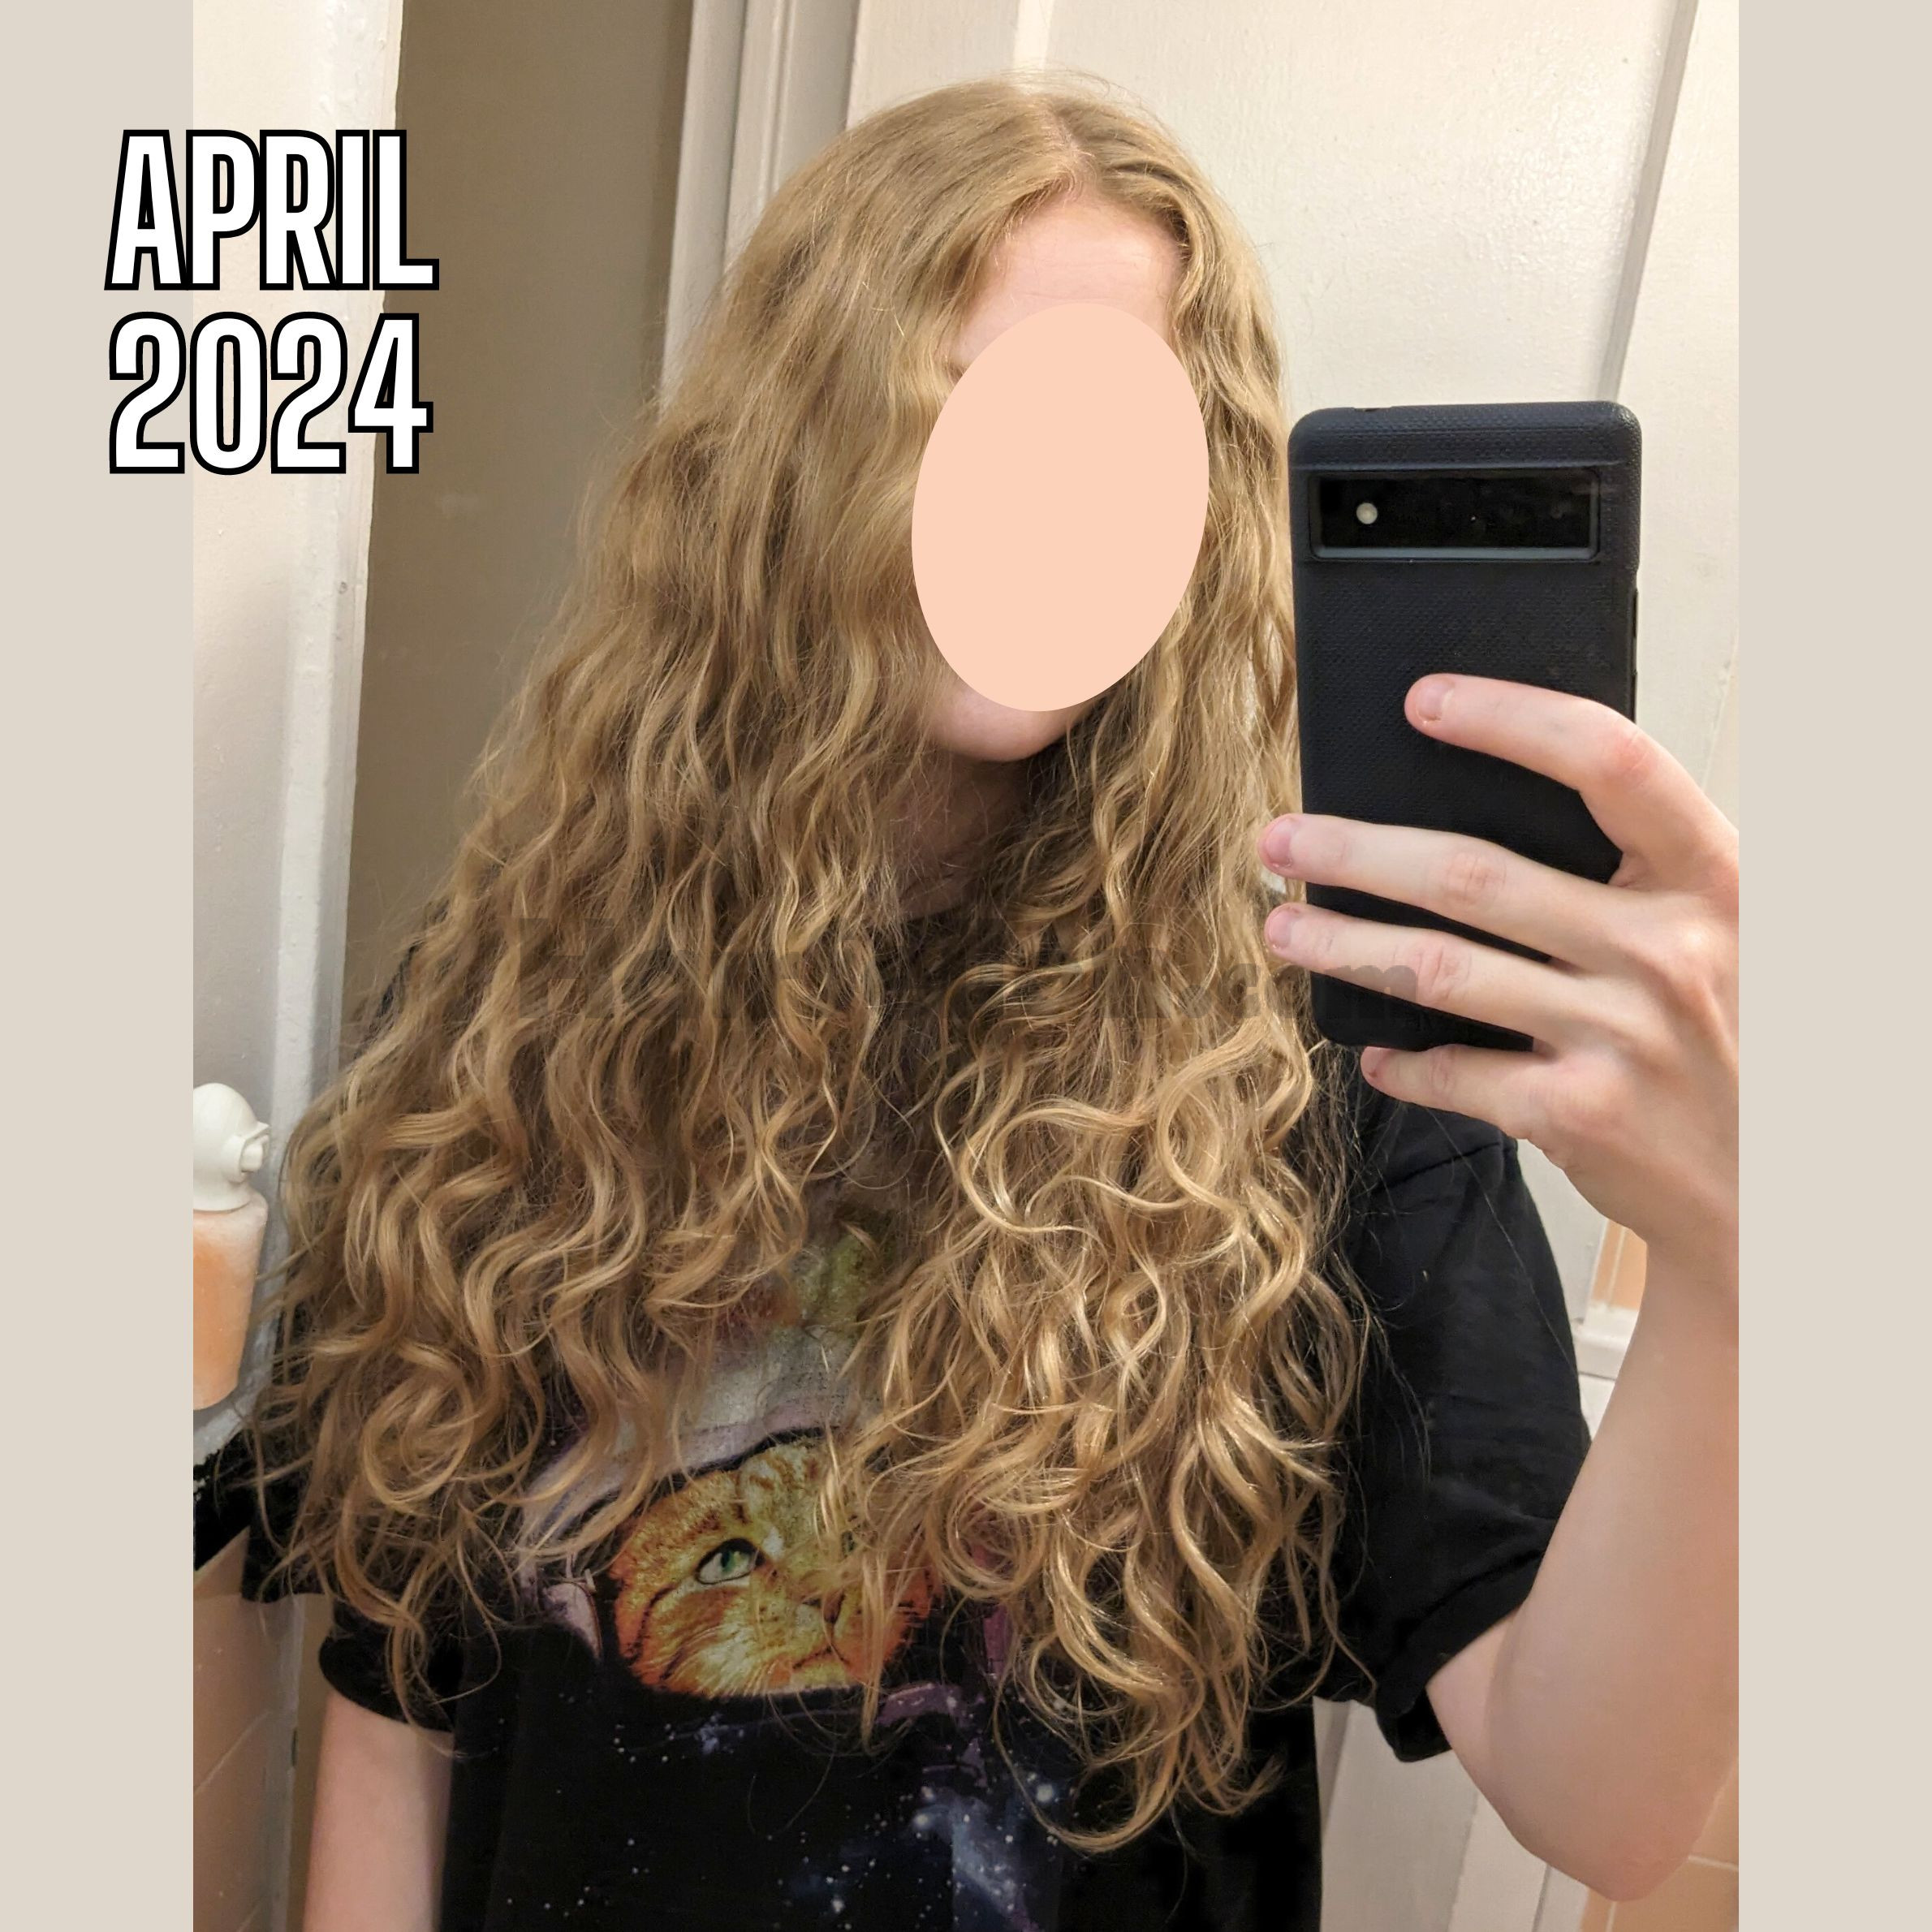 Front View, Natural Curls (Just Washed)